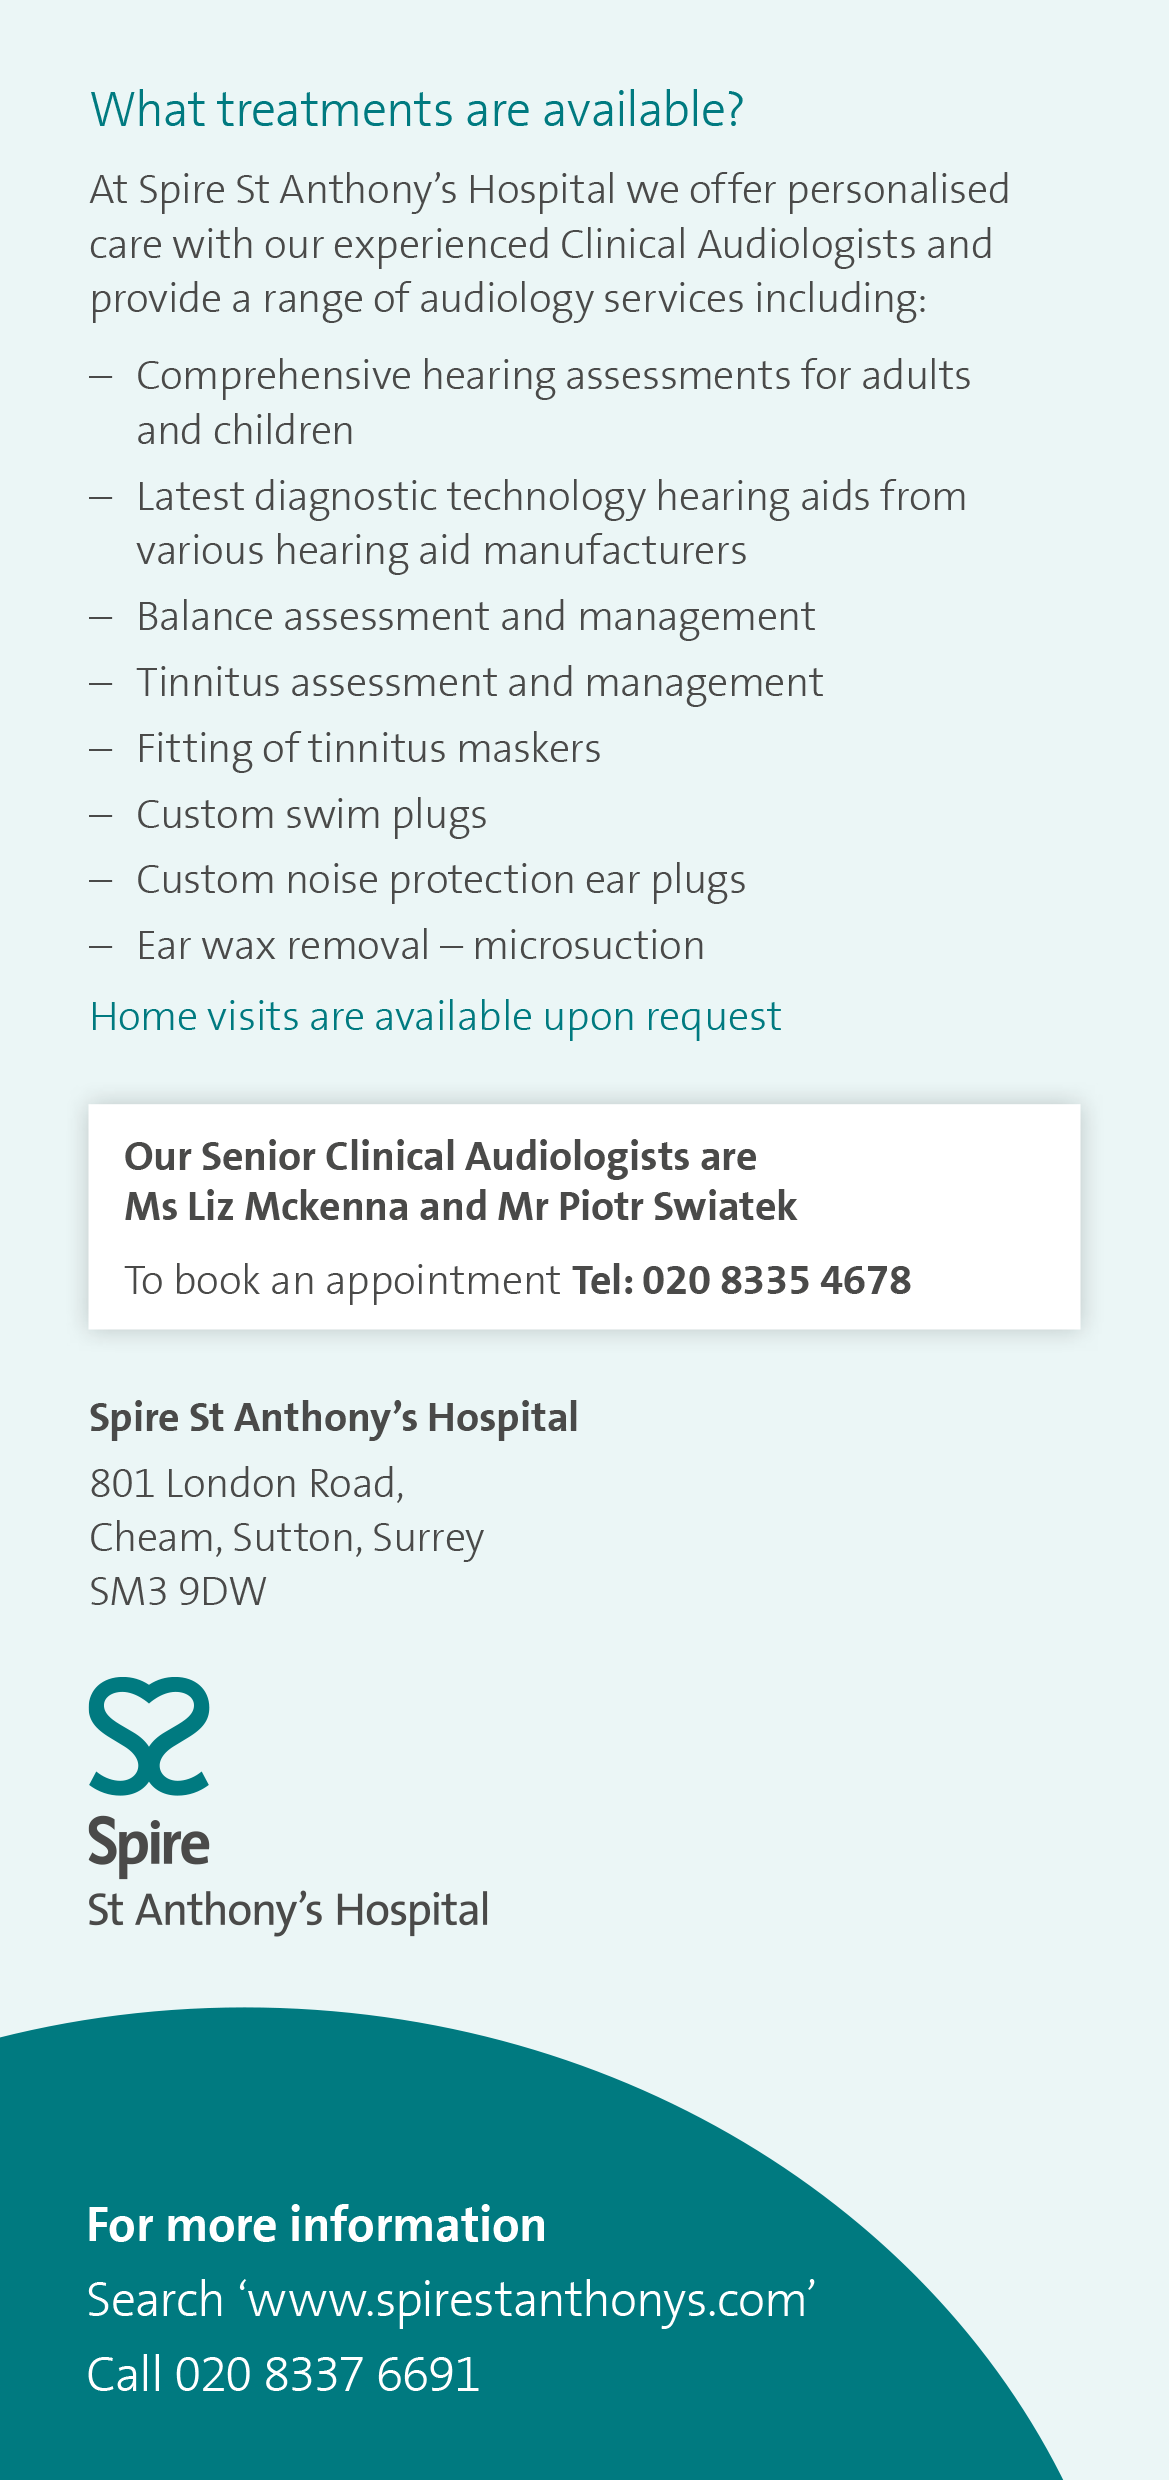 Spire Hospital Audiology Services (pg 2)